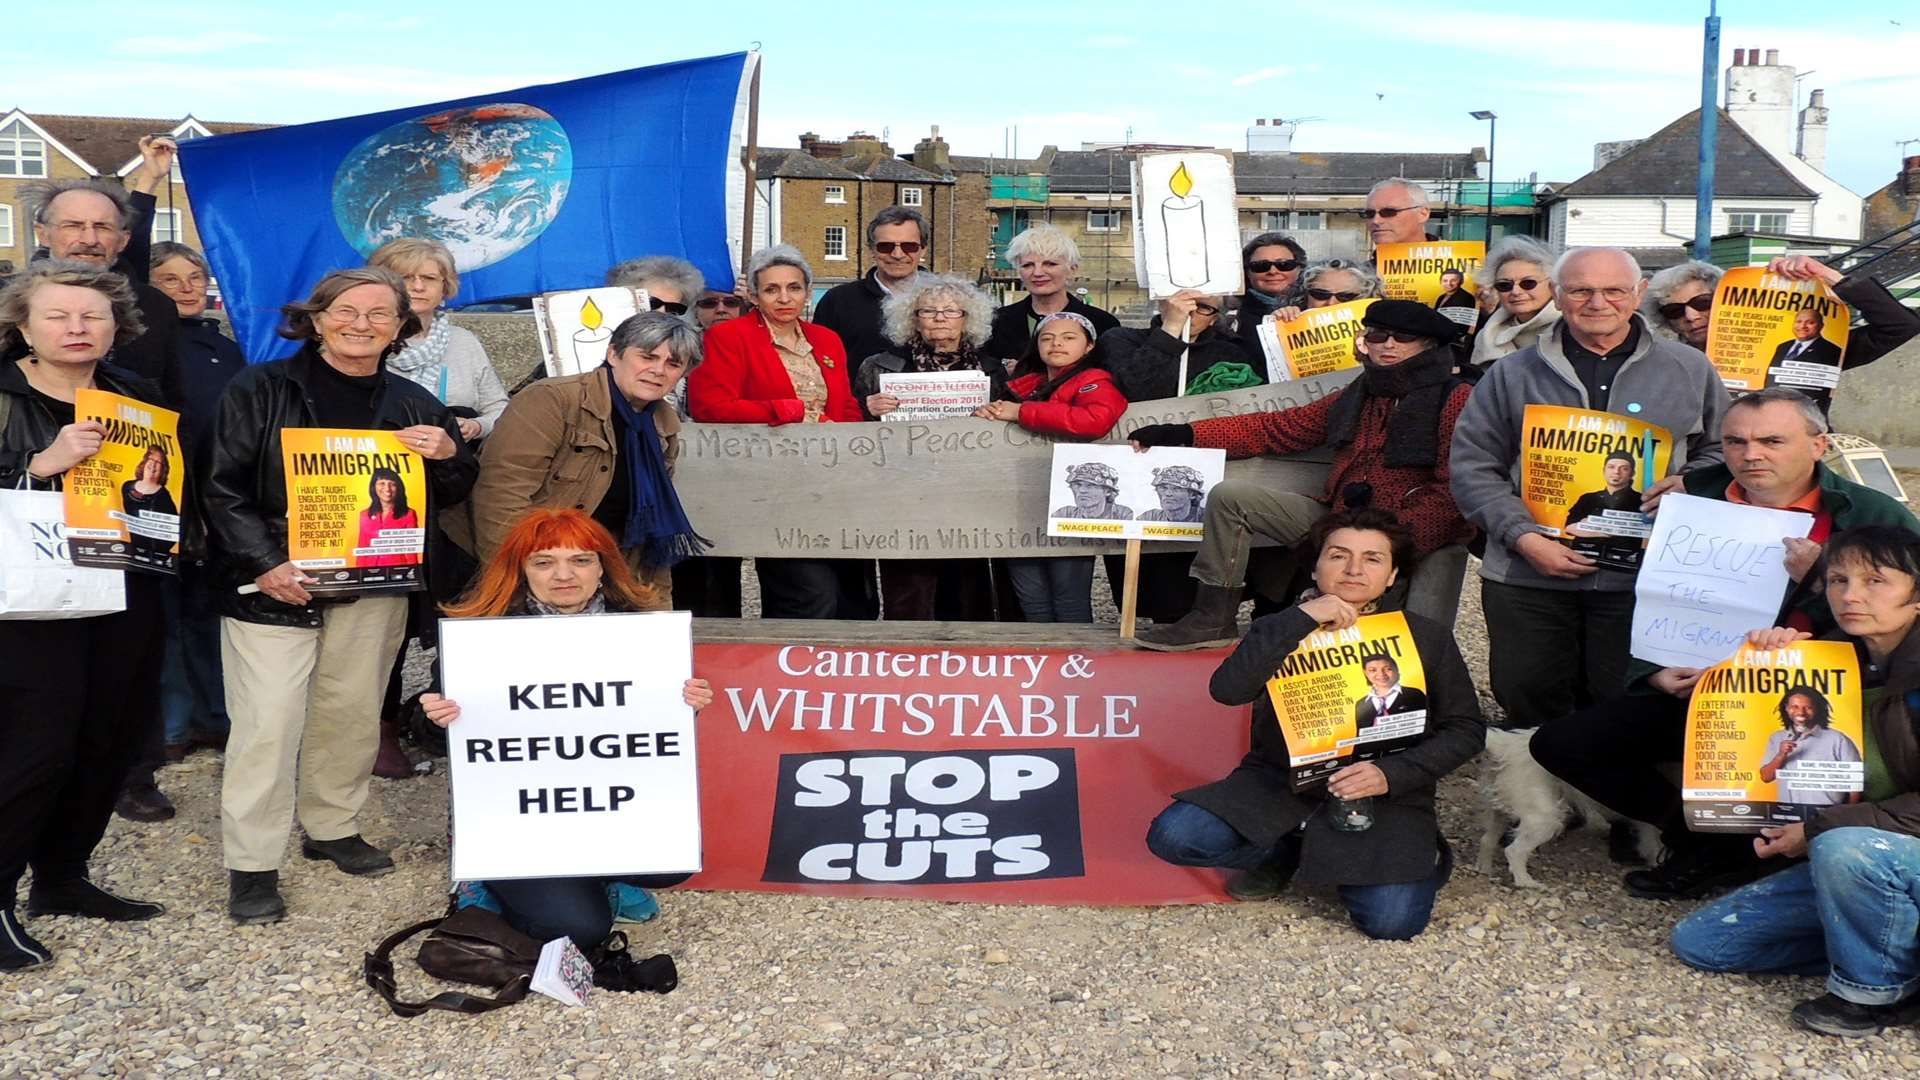 A protest held in Whitstable earlier this year